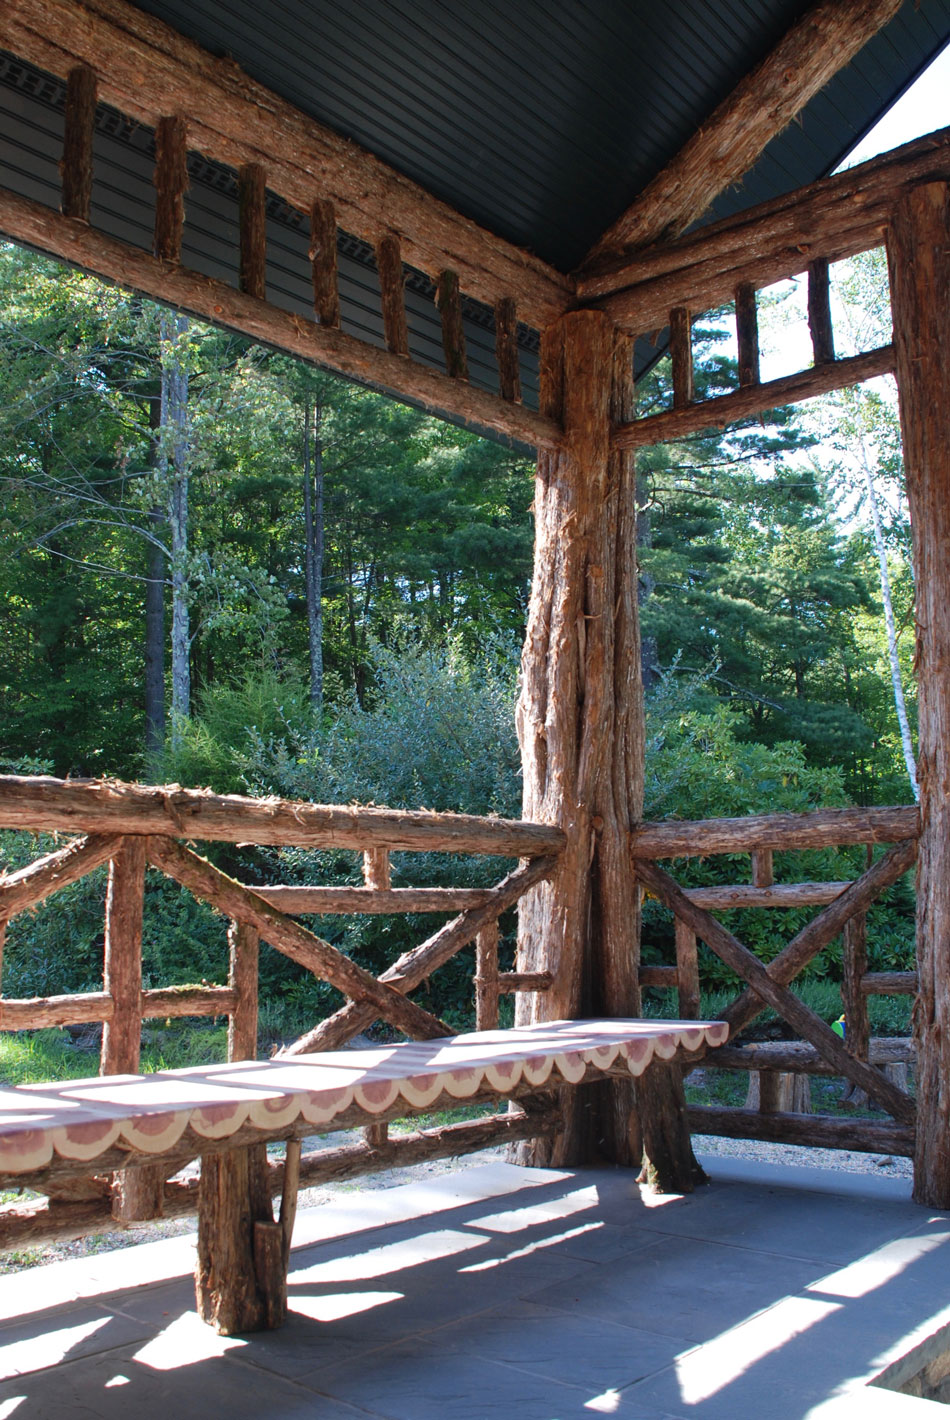 Railings built in the rustic style using logs and branches titled the Bearsville Benches